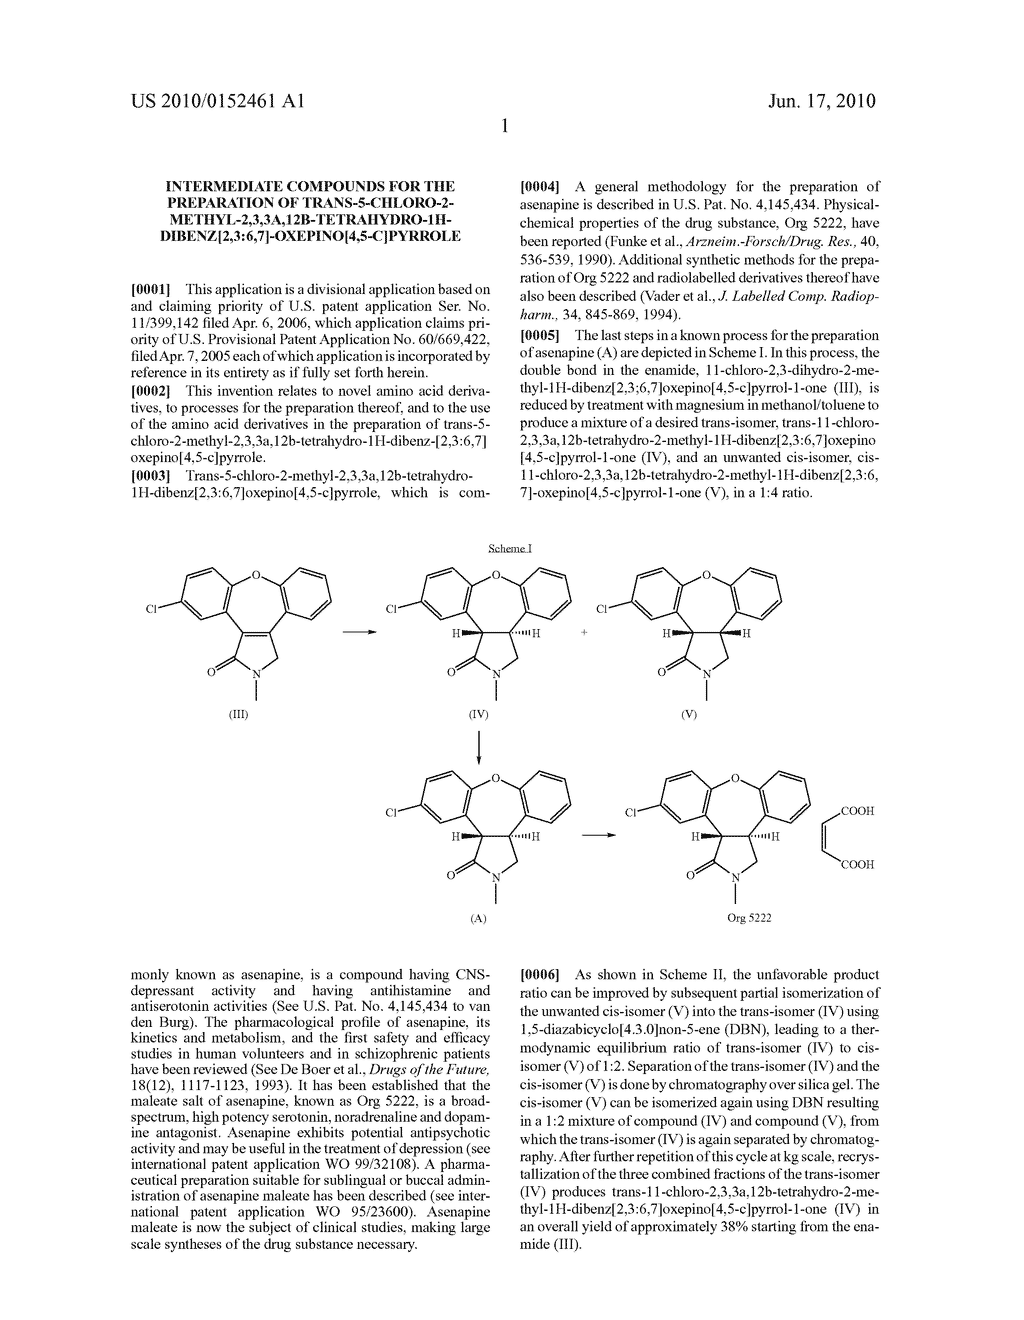 INTERMEDIATE COMPOUNDS FOR THE PREPARATION OF TRANS-5-CHLORO-2-METHYL-2,3,3A,12B-TETRAHYDRO-1H-DIBENZ[2,3:6,7]-OXEPINO[- 4,5-C]PYRROLE - diagram, schematic, and image 02